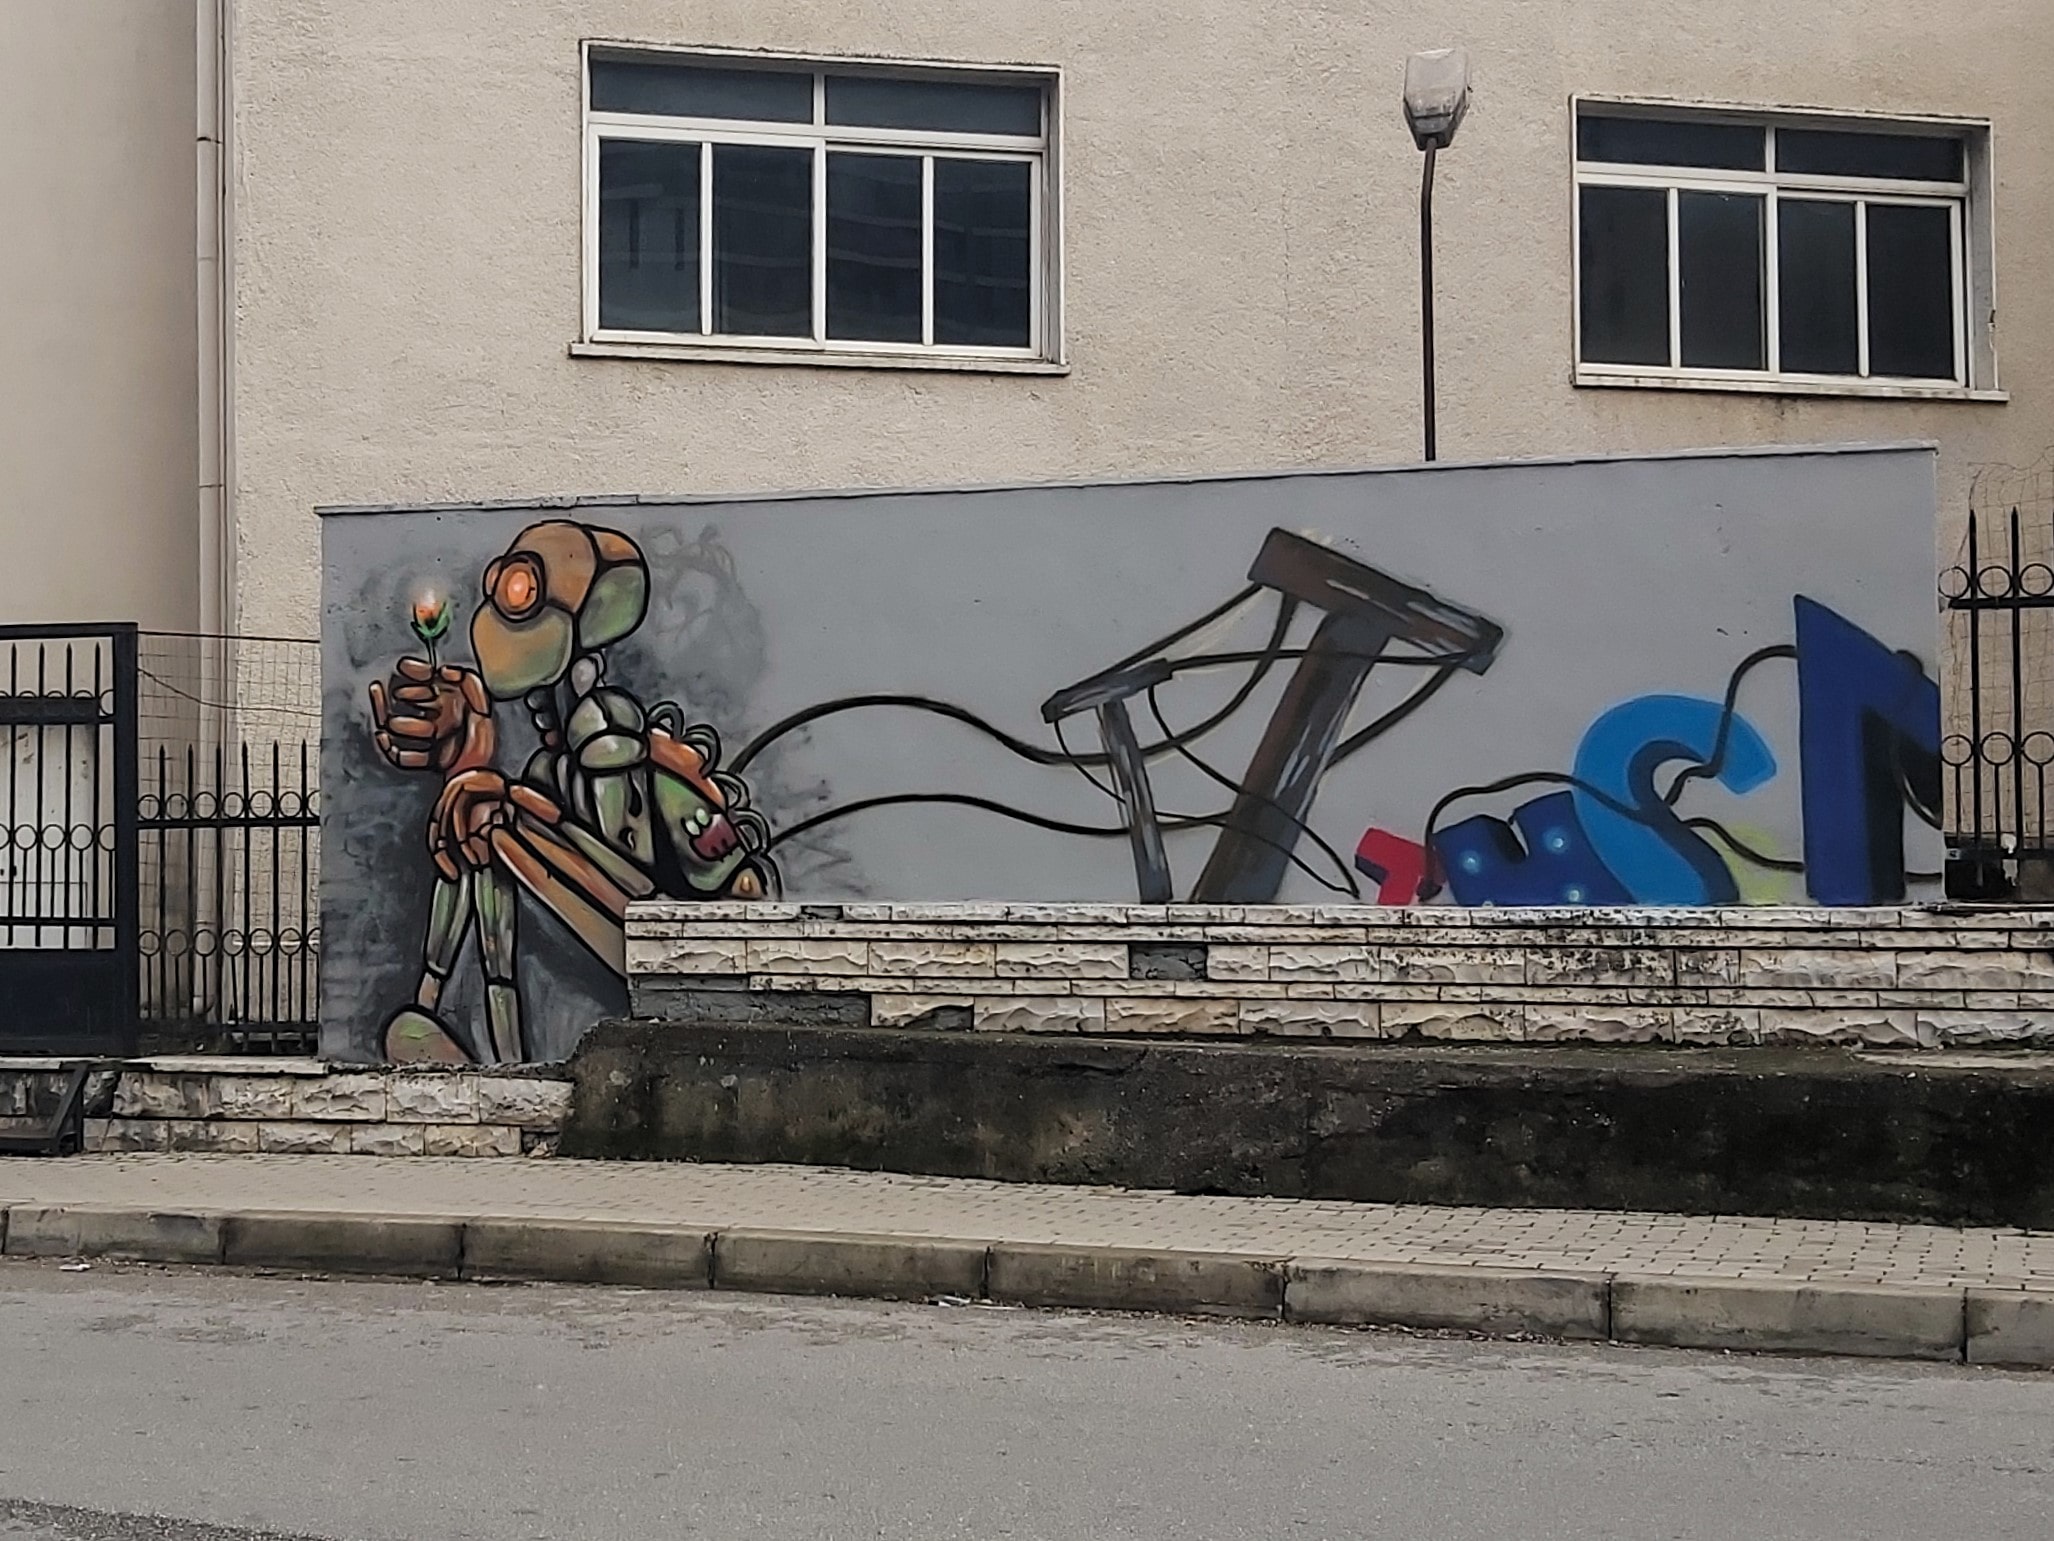 A thoughtful looking robot mural. Possibly post apocalyptic. In Tirana, Albania.